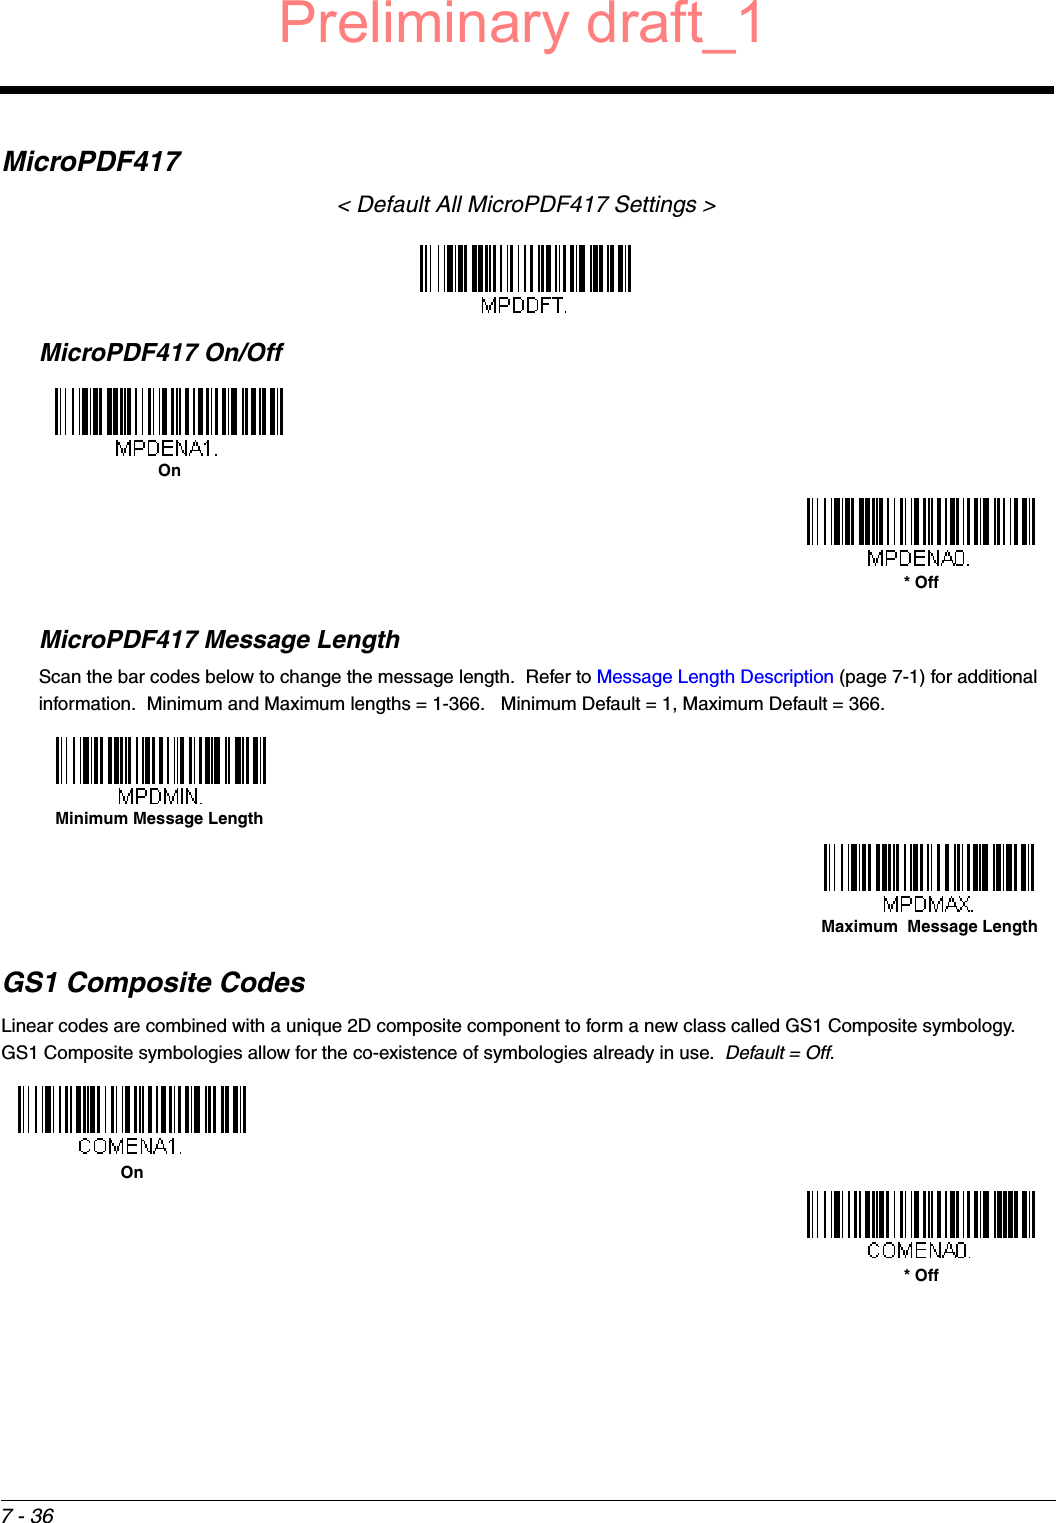 7 - 36MicroPDF417&lt; Default All MicroPDF417 Settings &gt;MicroPDF417 On/OffMicroPDF417 Message LengthScan the bar codes below to change the message length.  Refer to Message Length Description (page 7-1) for additional information.  Minimum and Maximum lengths = 1-366.   Minimum Default = 1, Maximum Default = 366.GS1 Composite CodesLinear codes are combined with a unique 2D composite component to form a new class called GS1 Composite symbology.  GS1 Composite symbologies allow for the co-existence of symbologies already in use.  Default = Off.On* OffMinimum Message LengthMaximum  Message LengthOn* OffPreliminary draft_1